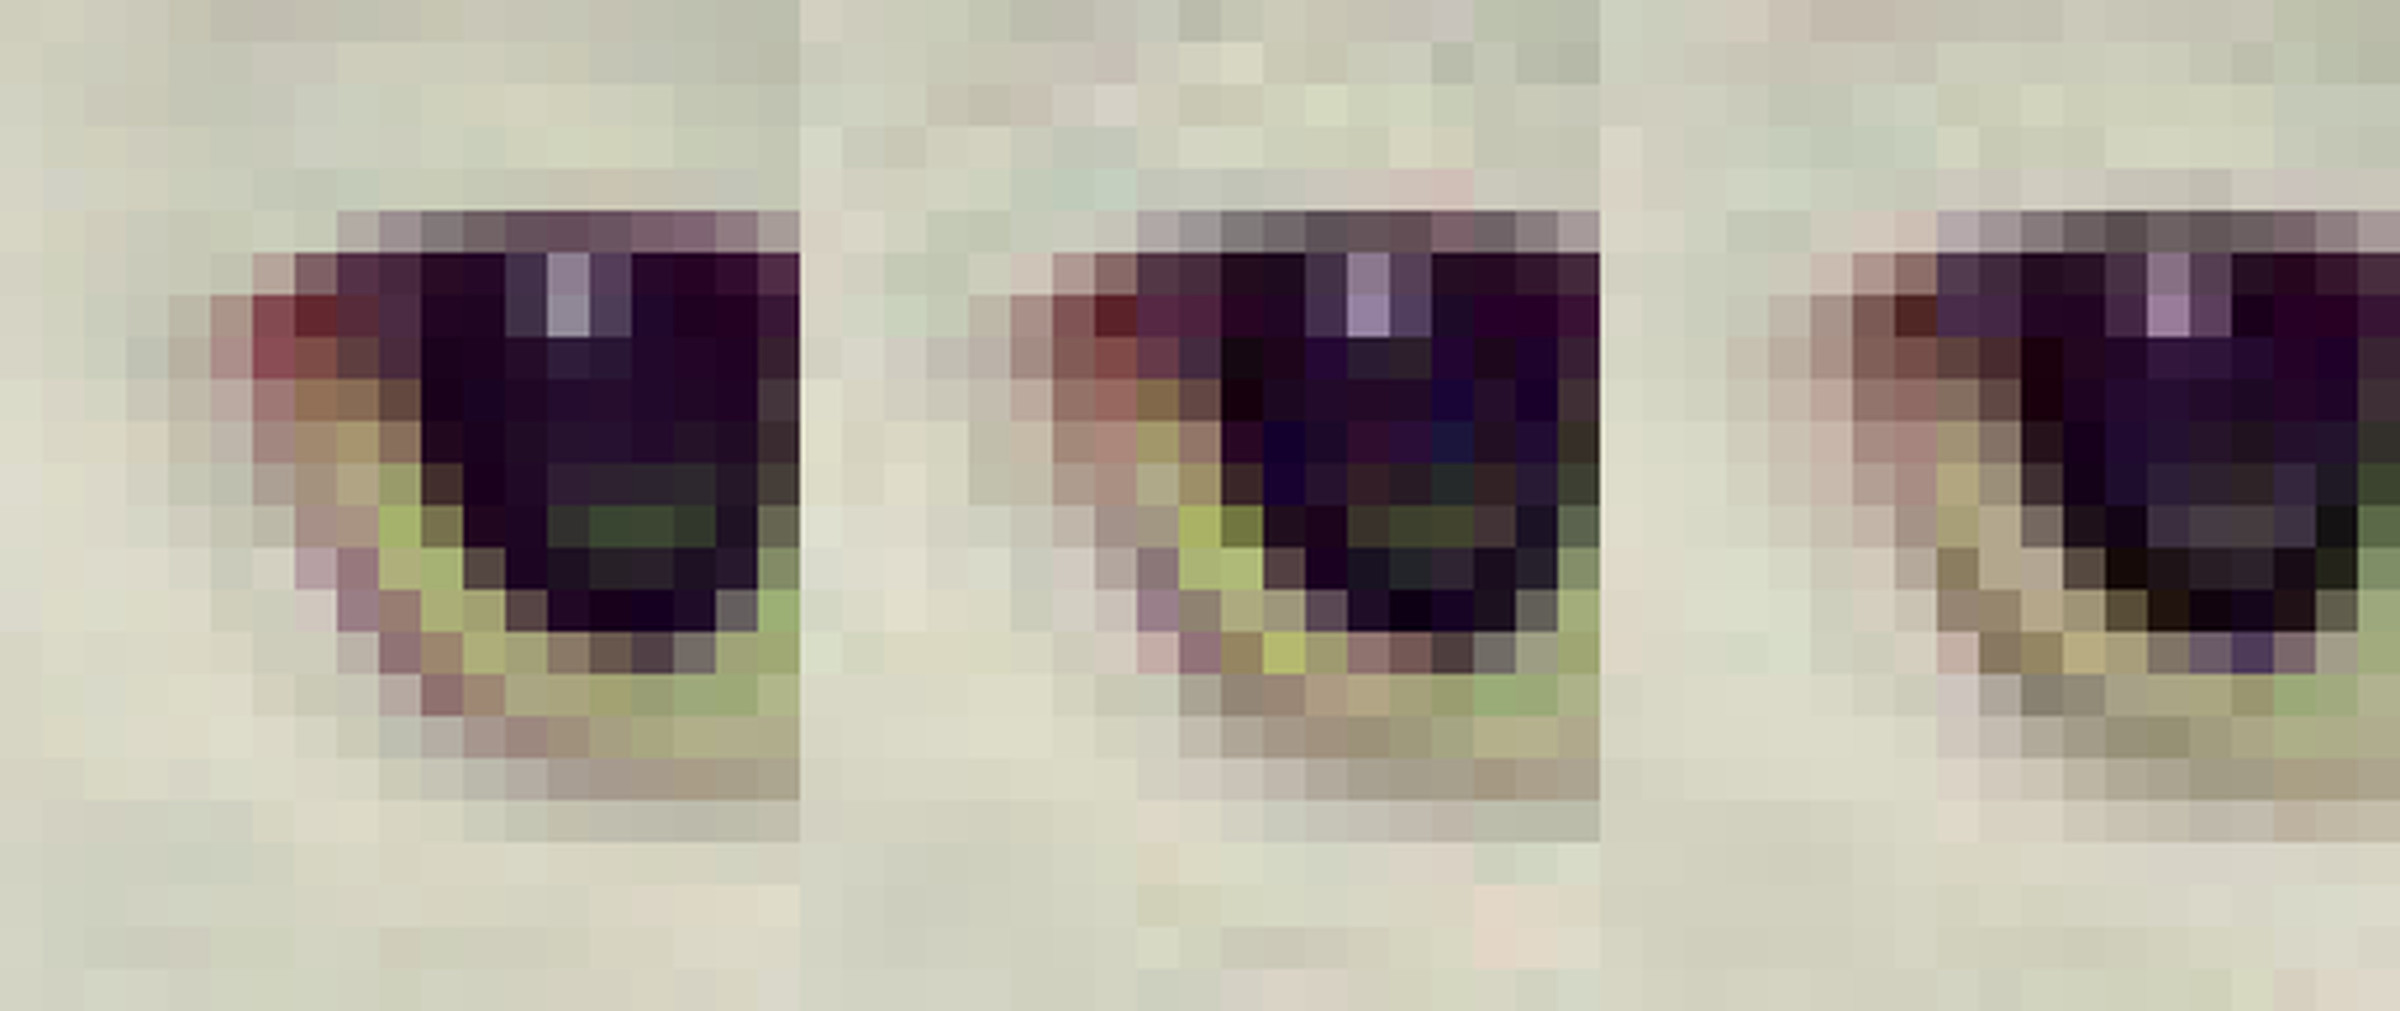 A 20 x 24 pixel image of a cat’s eye. Left: The uncompressed original. Middle: Standard libjepg encoder. Right: Guetzli. Google claims that Guetzli has fewer artifacts without a larger file size.